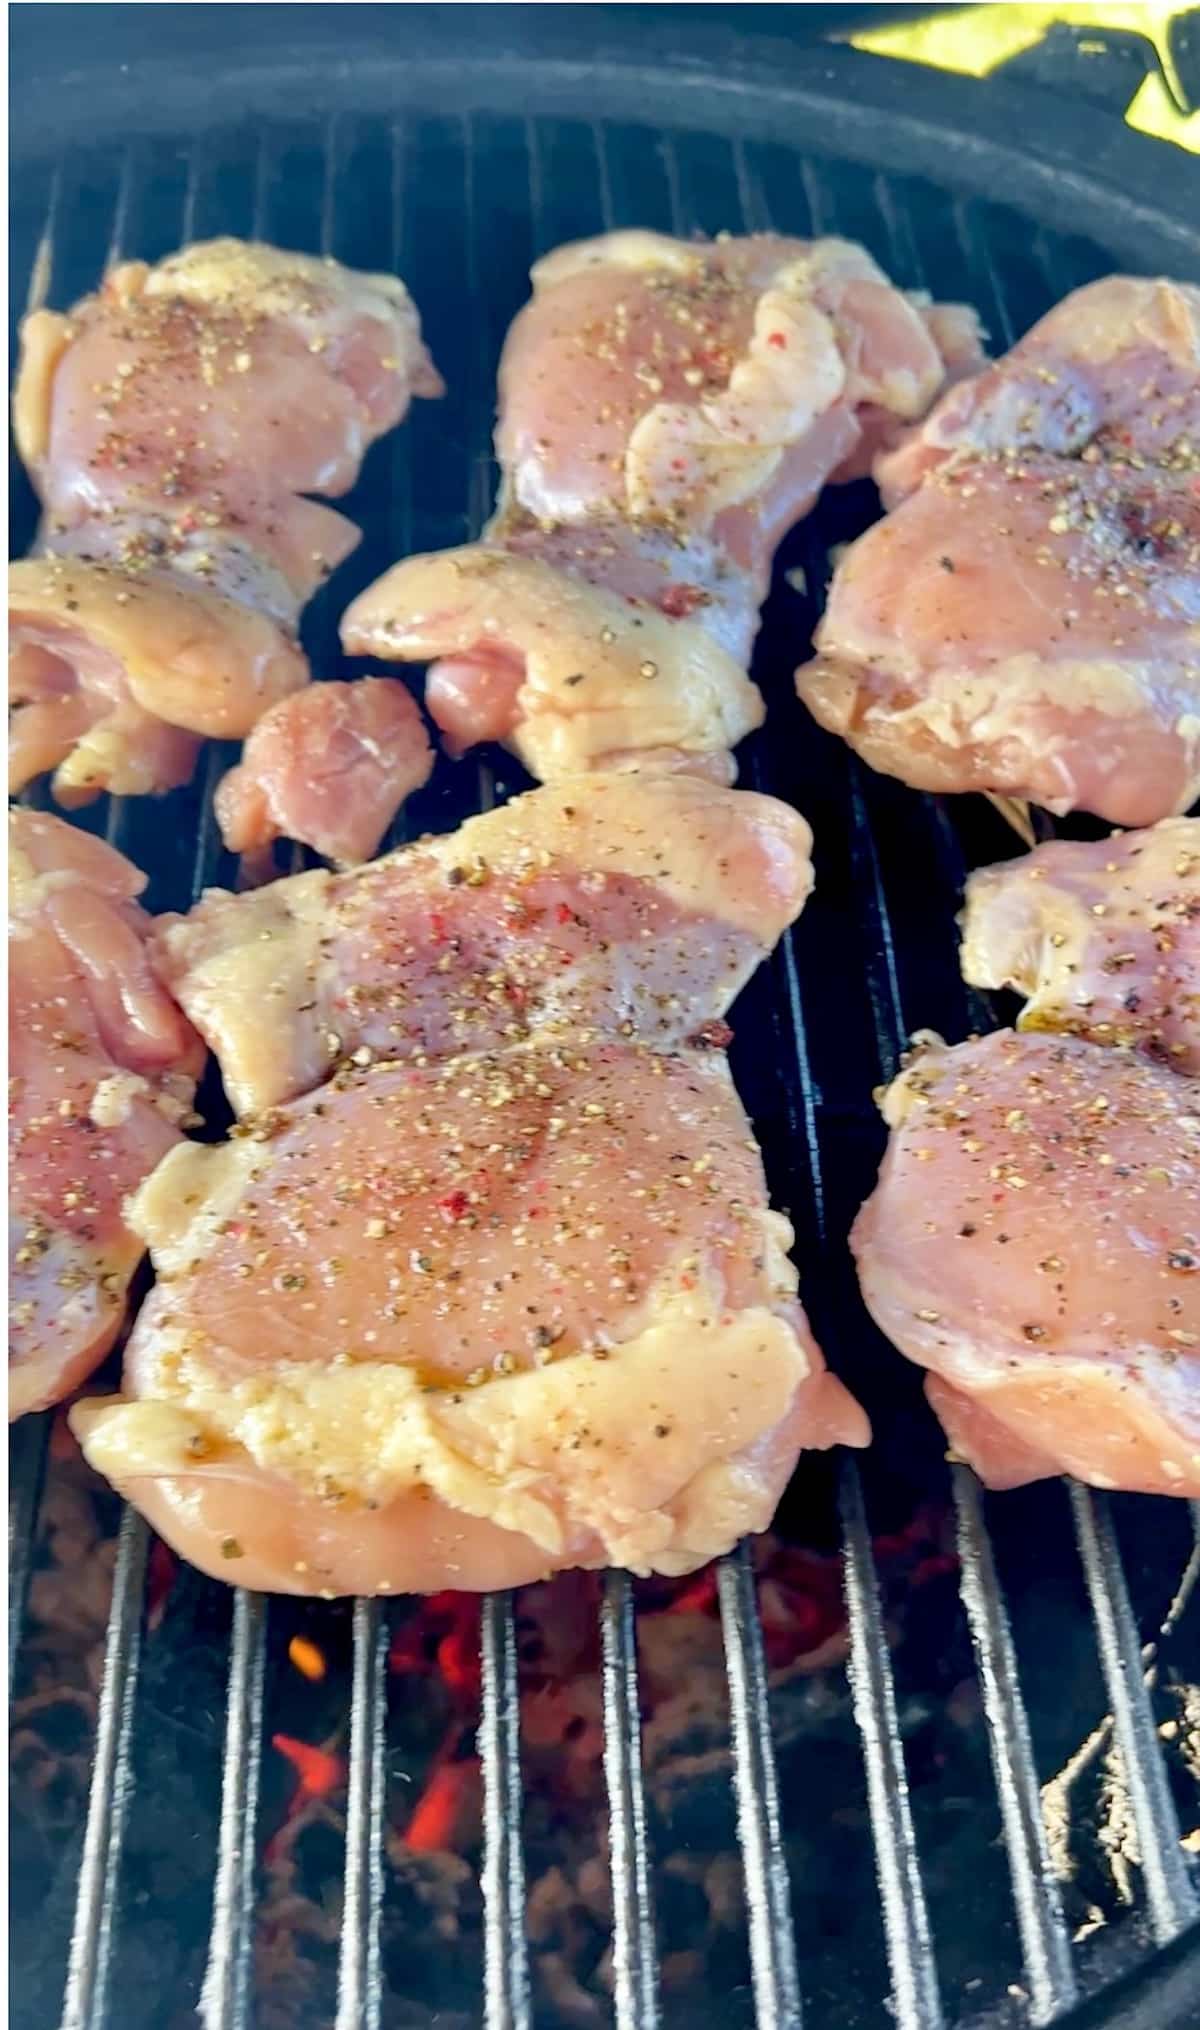 Chicken thighs on a grill.